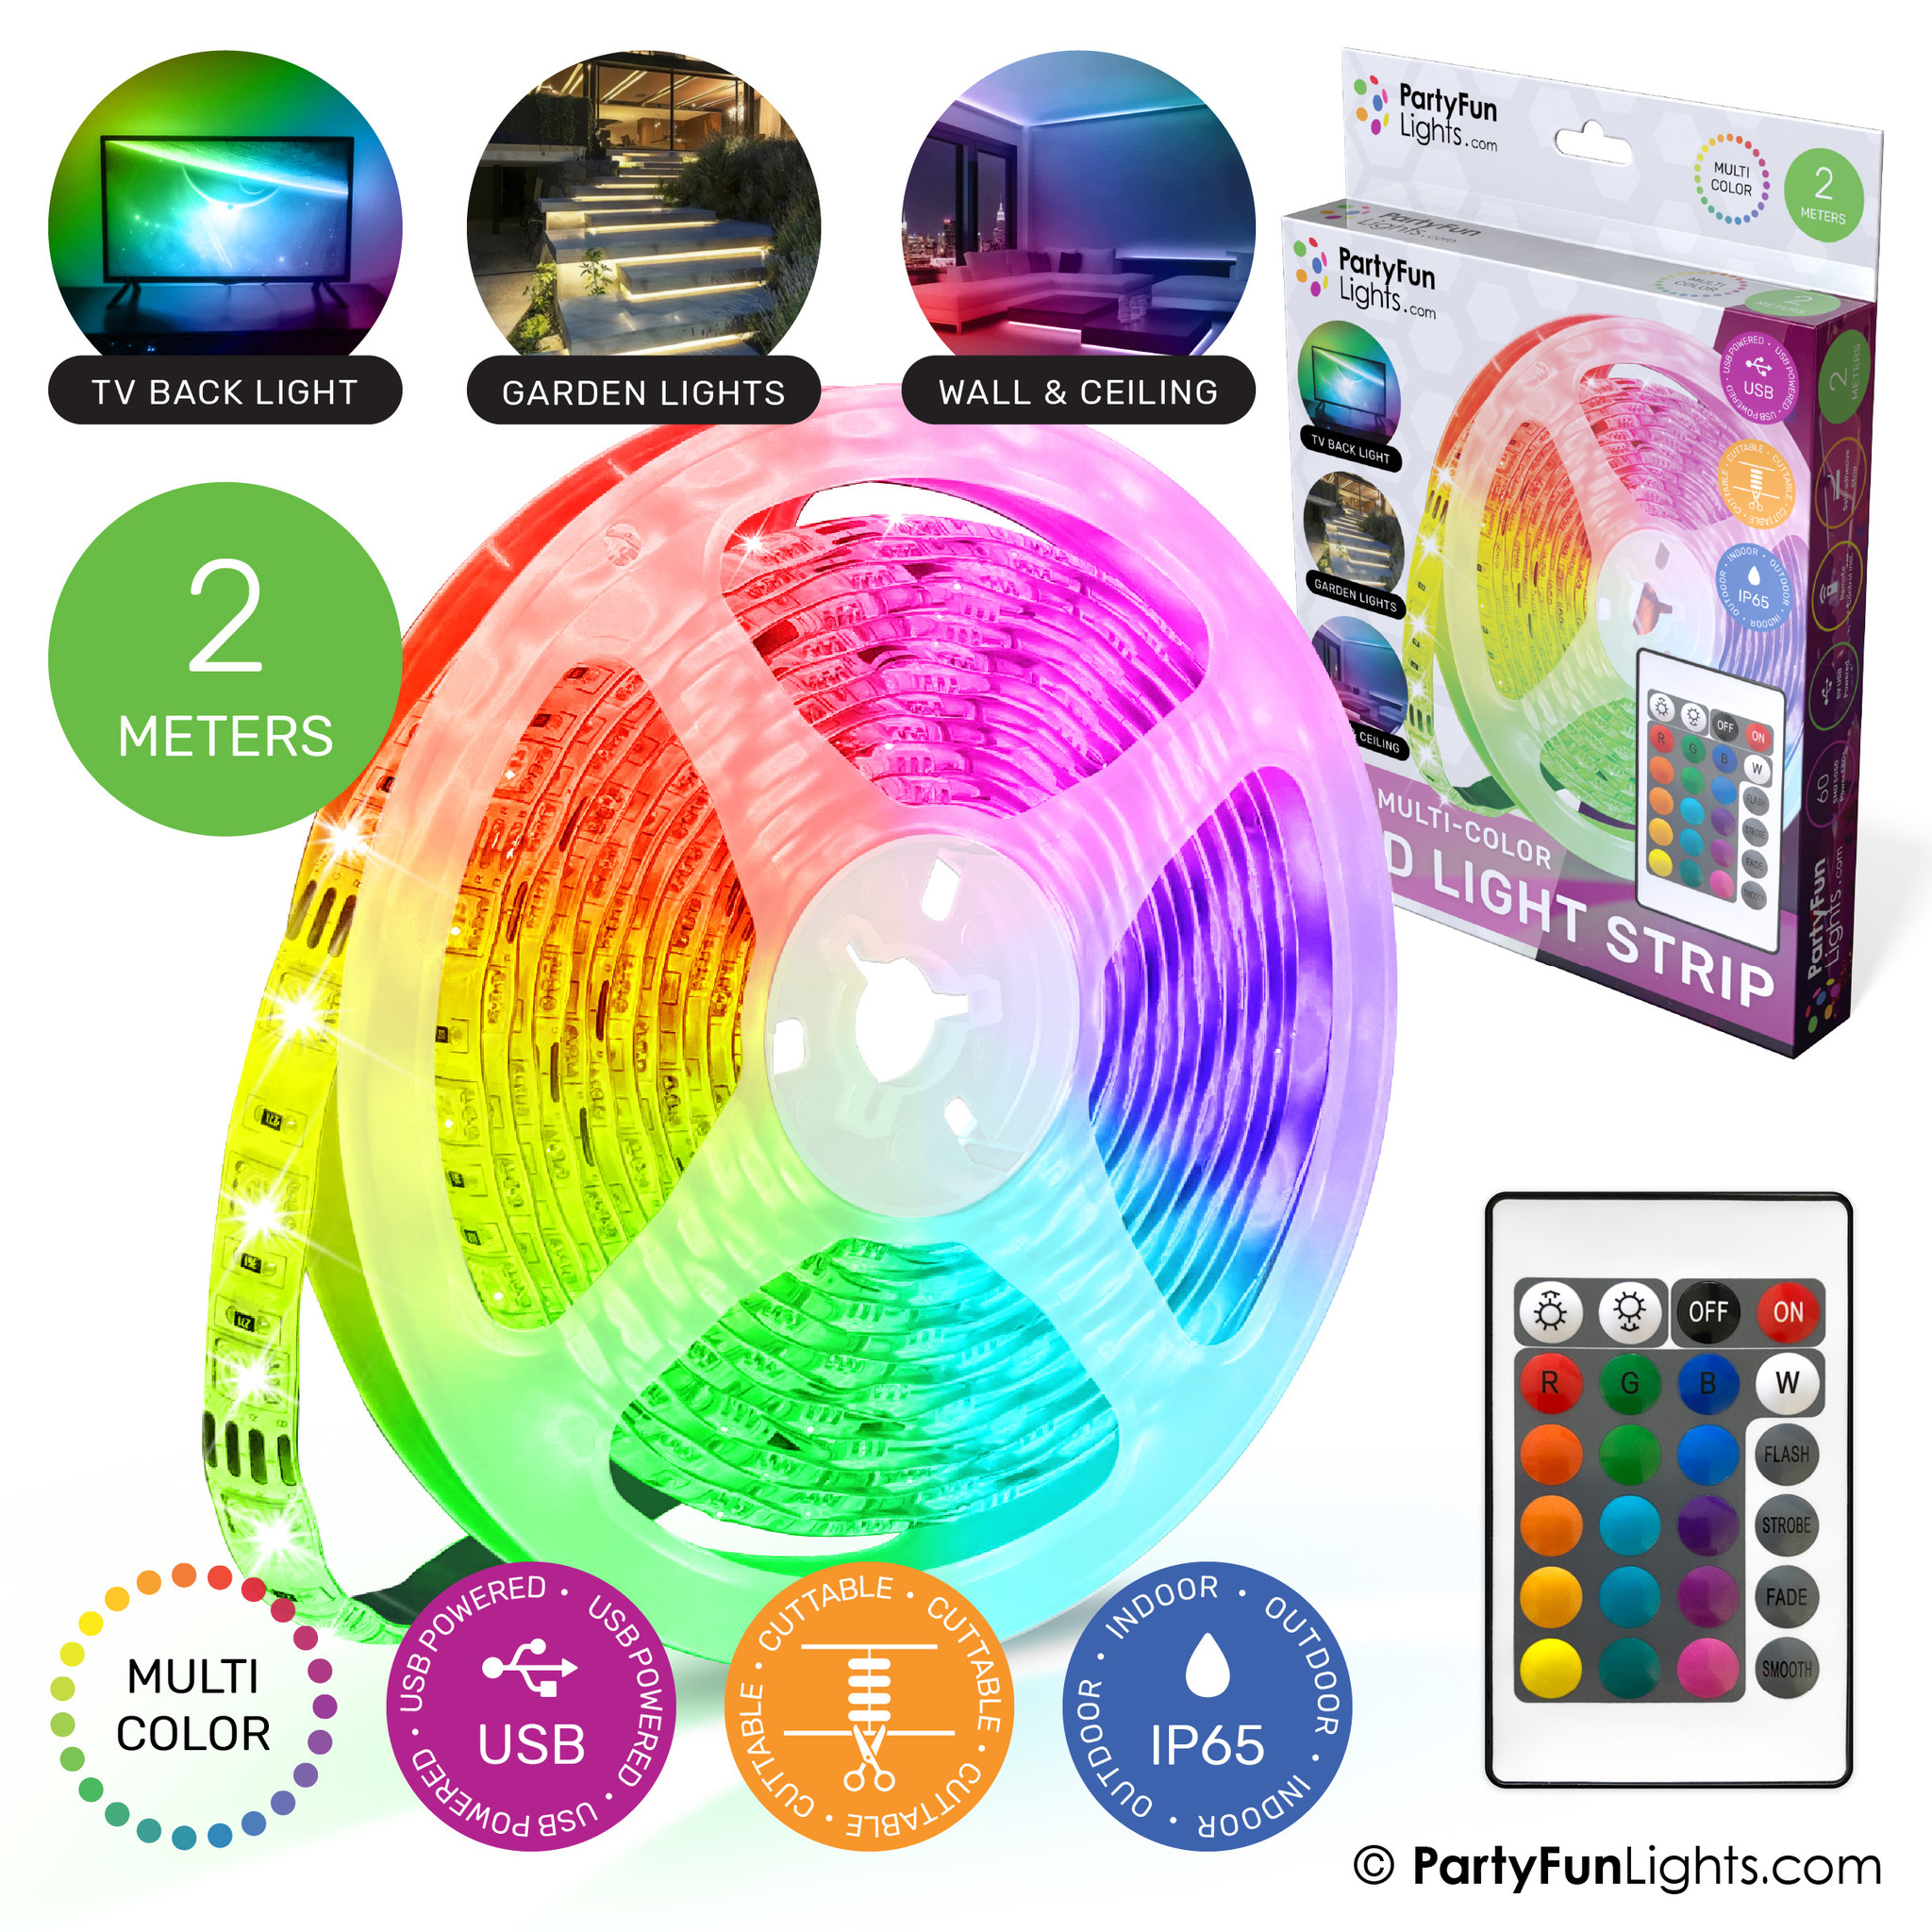 LED Strip Multi-Color RGB - USB Powered - 2 Meter - PartyFunLights